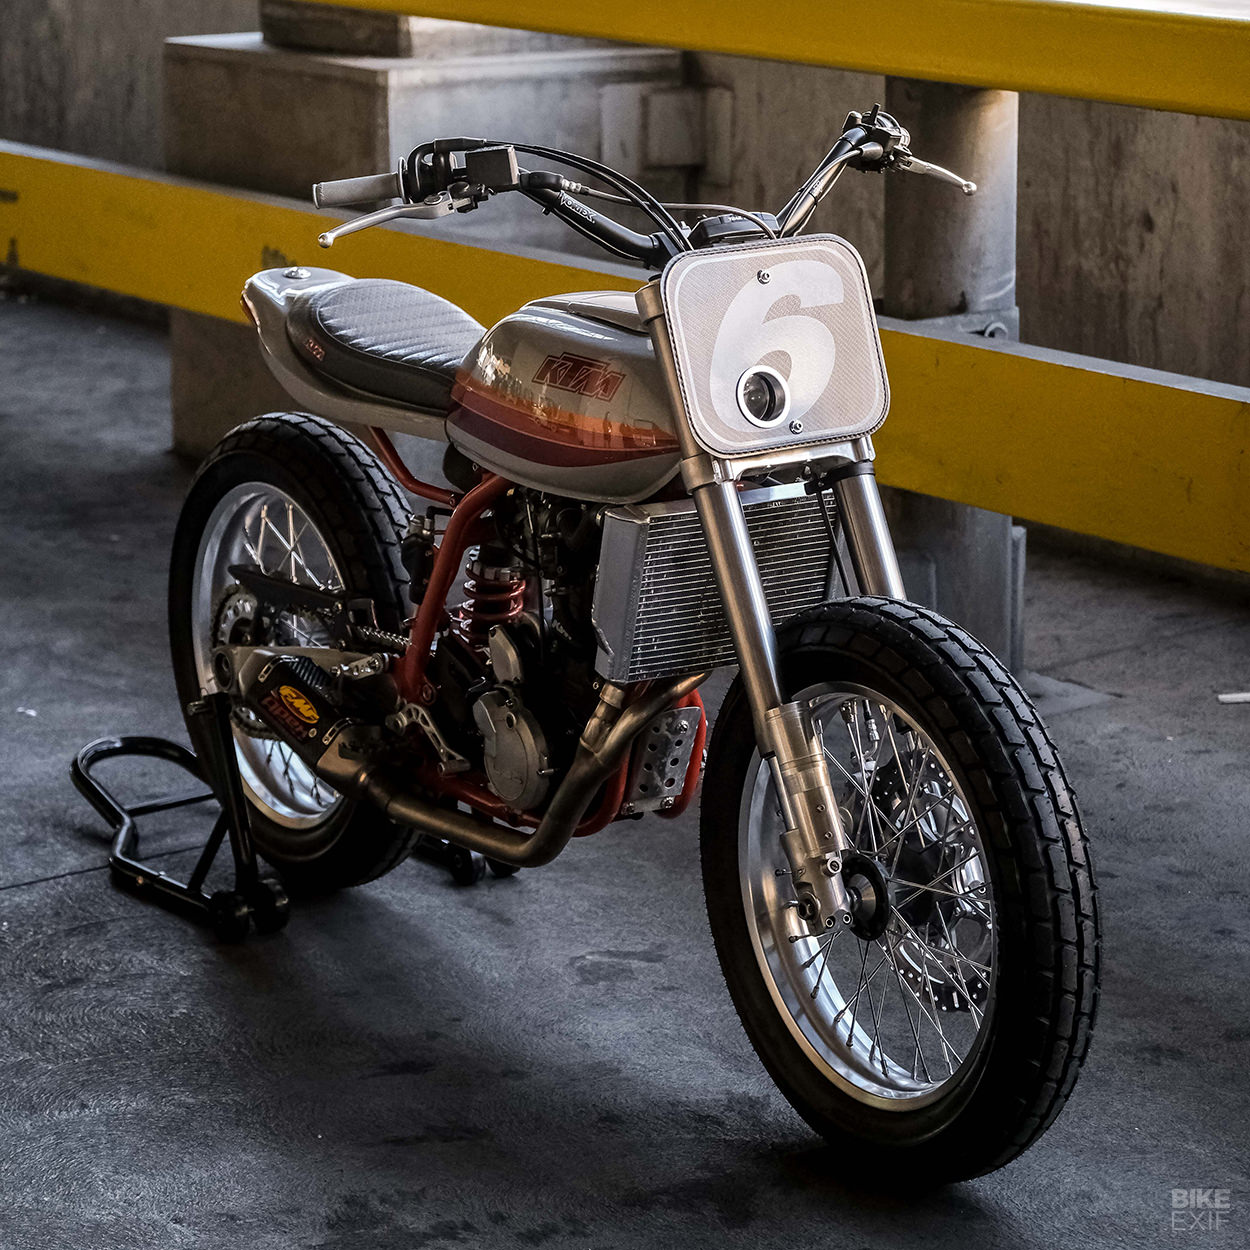 Daily Driver: A KTM Duke II street tracker motorcycle by Dubstyle Designs